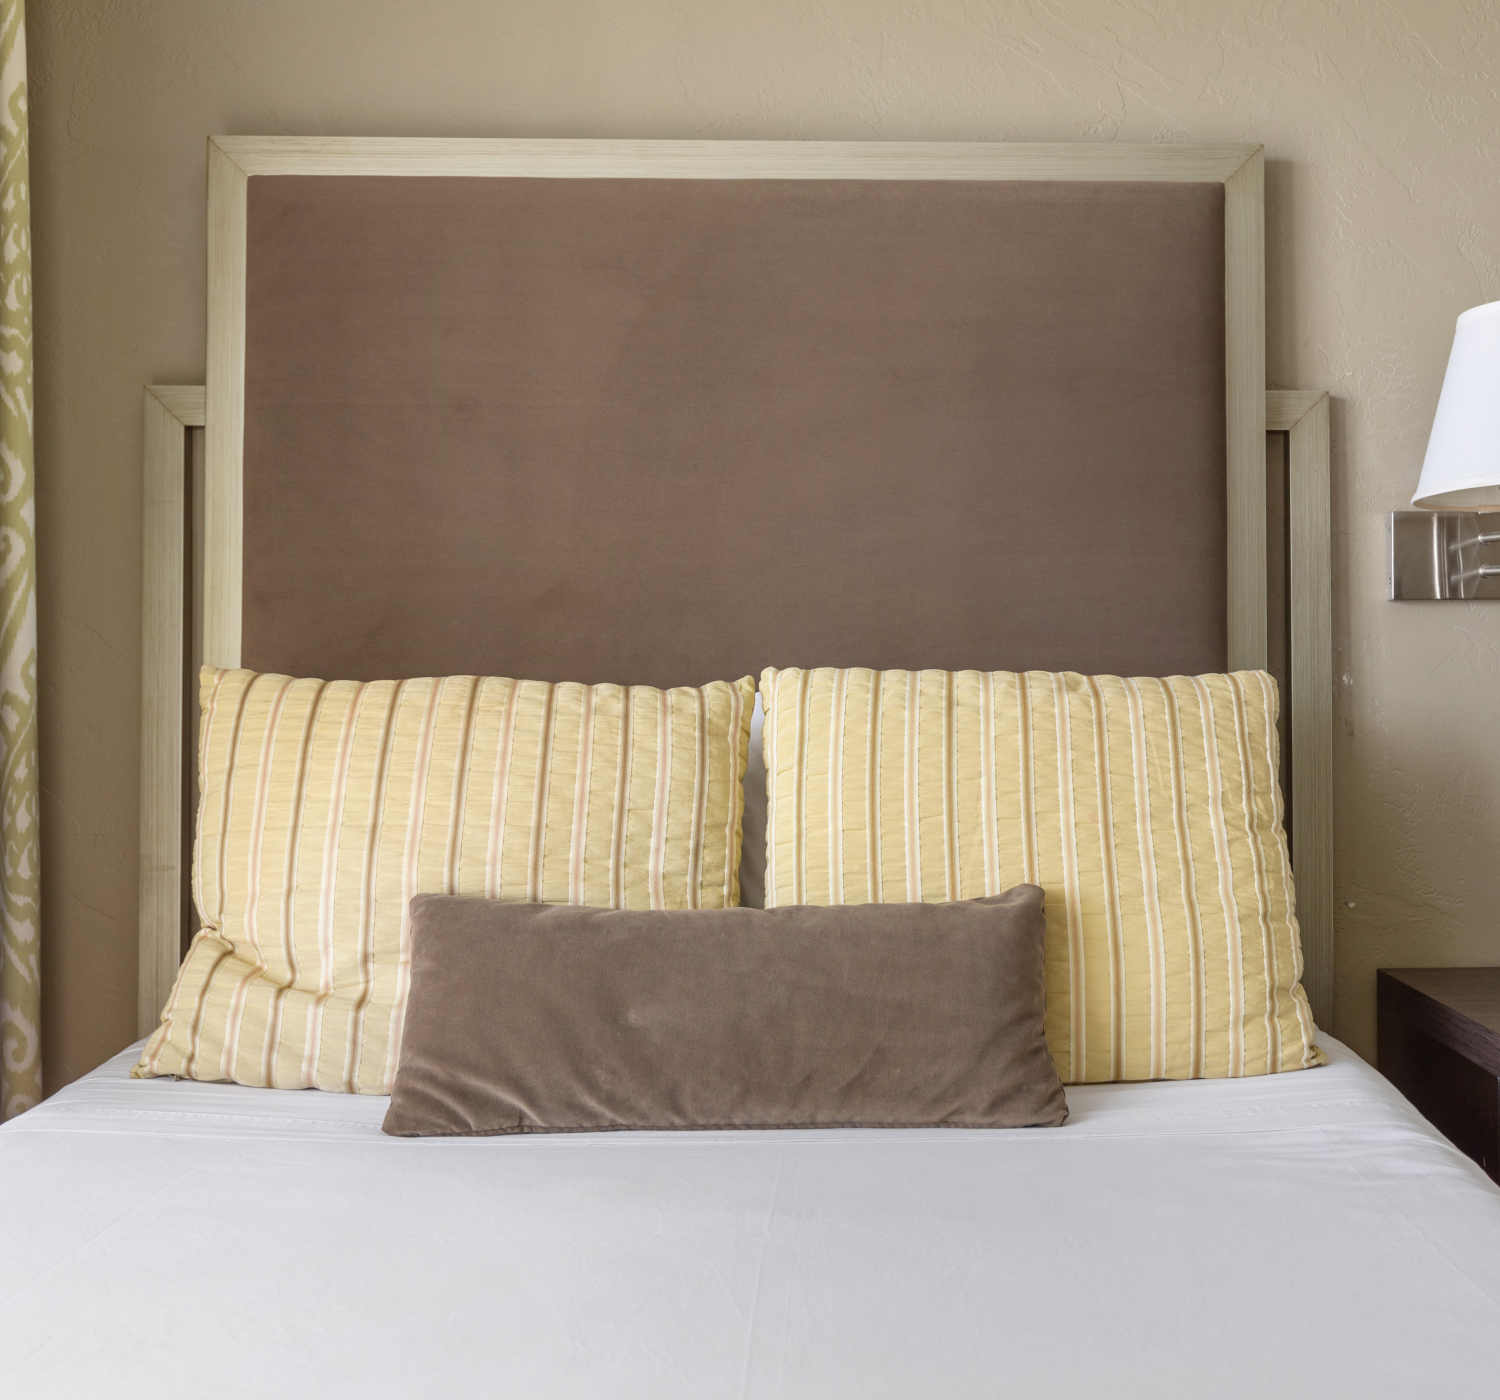 A neatly made bed with a brown cushioned headboard, two yellow pillows, a smaller brown pillow, a bedside table, and a white lamp.